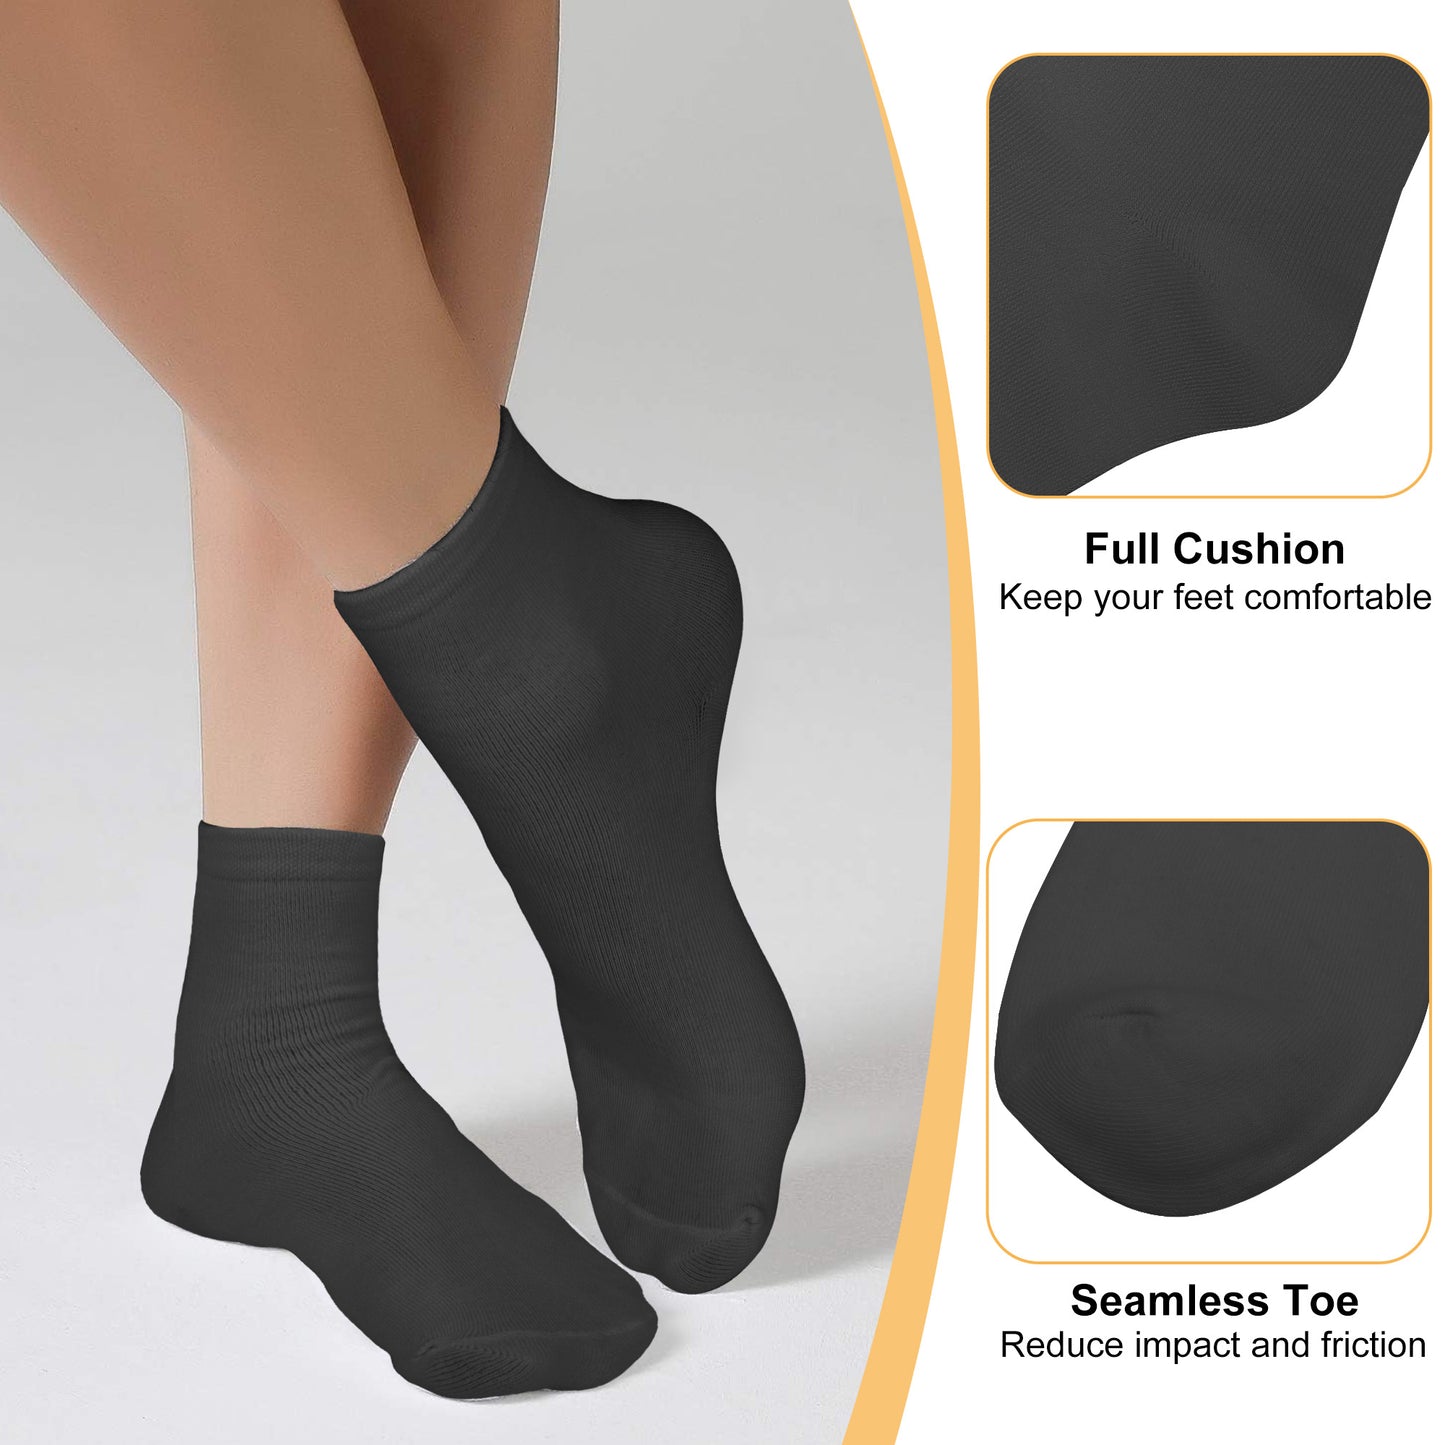 6 Pairs Unisex Ankle Socks - Women Men Athletic Short Cotton Socks Thin Lightweight Classic Casual Socks suitable for casual and athletic wear providing comfort and style (Black)